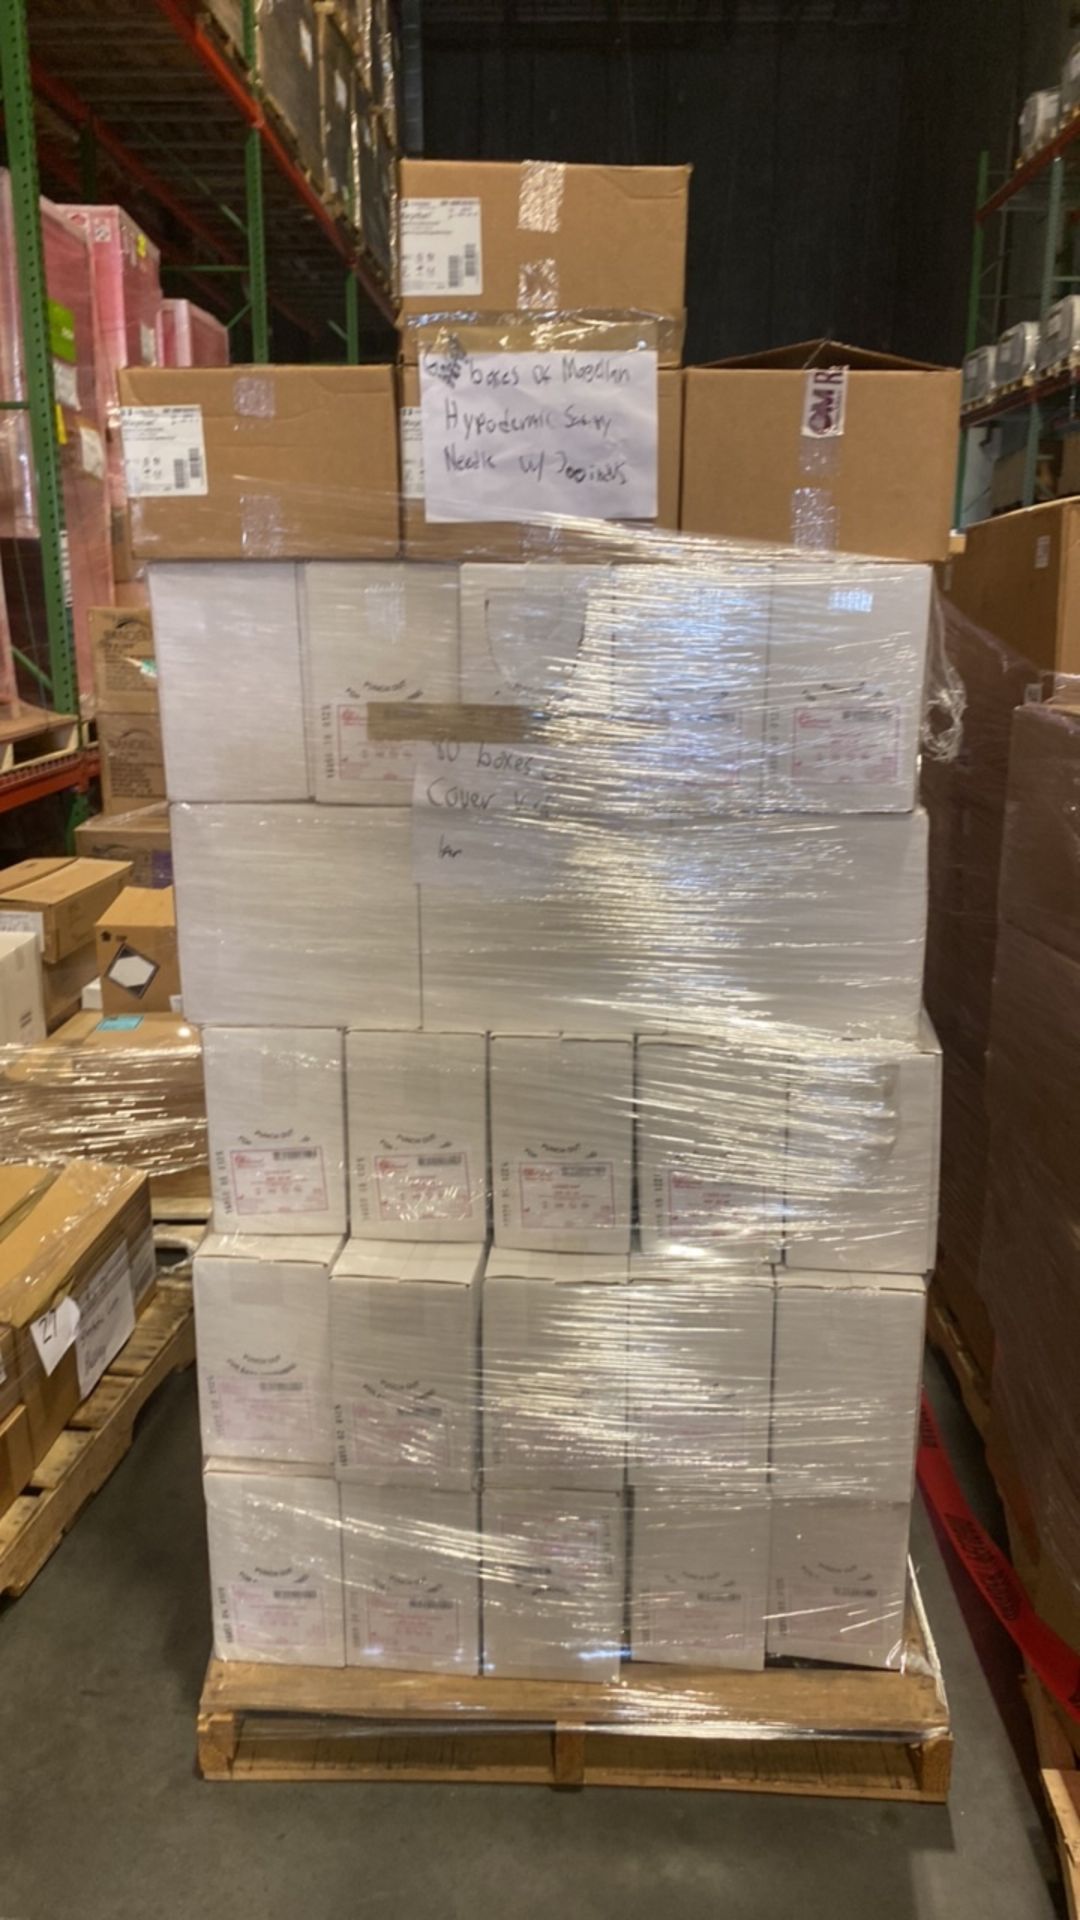 PALLET AND CONTENTS TO INCLUDE:80 Boxes of Cover Kap (1 per) ? 6 Boxes of Magellan Hypodermic Safety